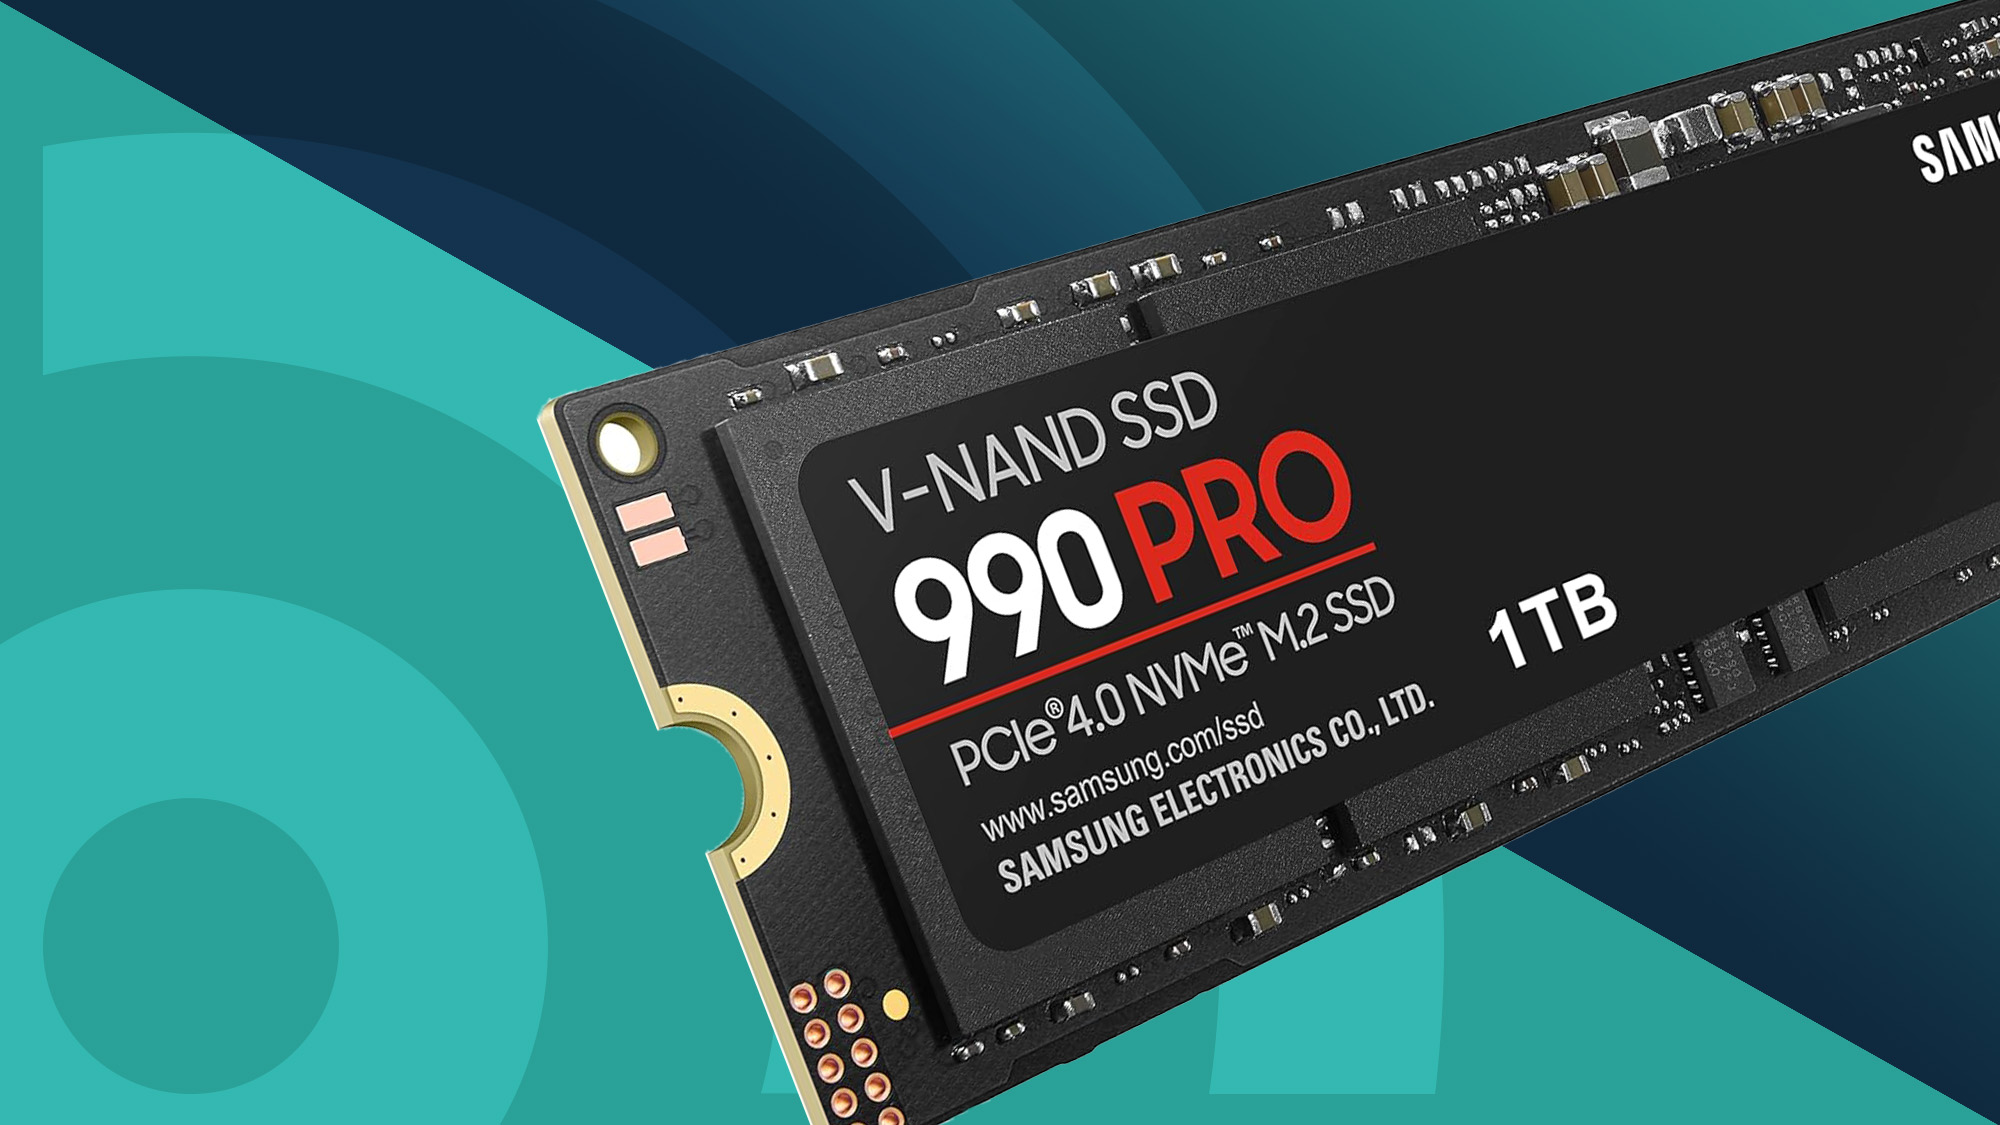 A Detailed Breakdown Of The 4 Best NVMe SSDs Of 2024